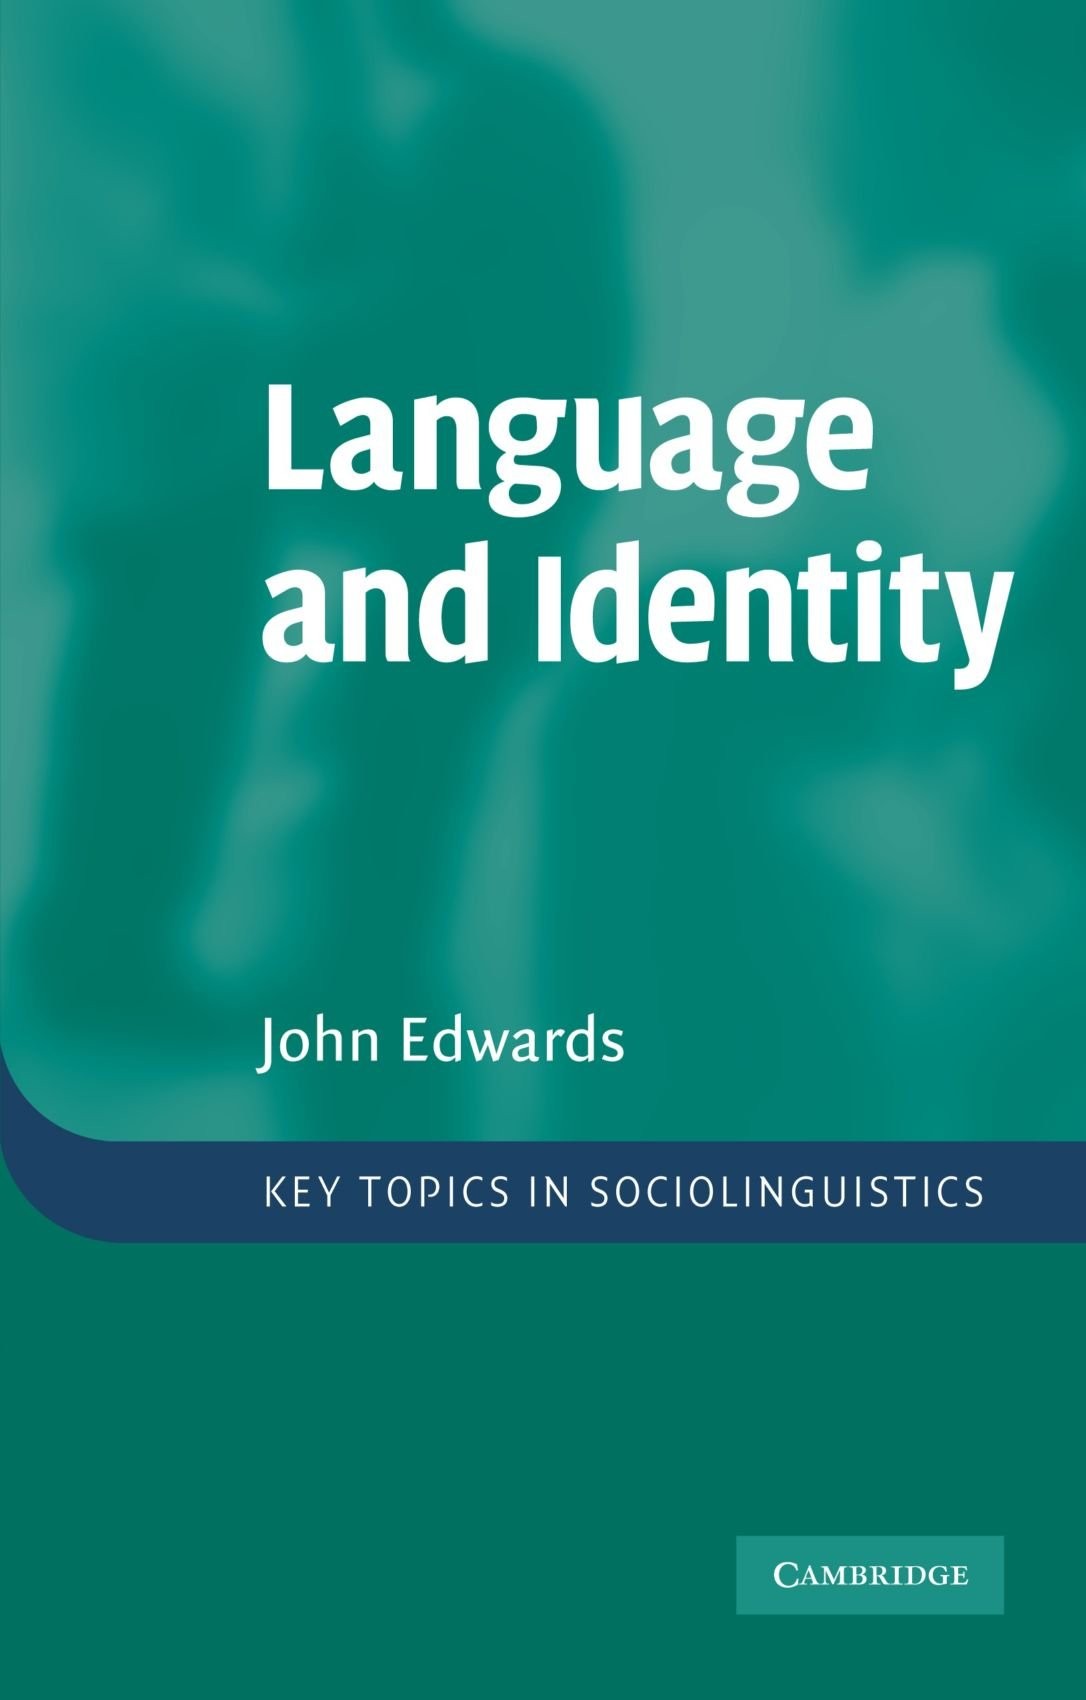 Language and Identity: An Introduction